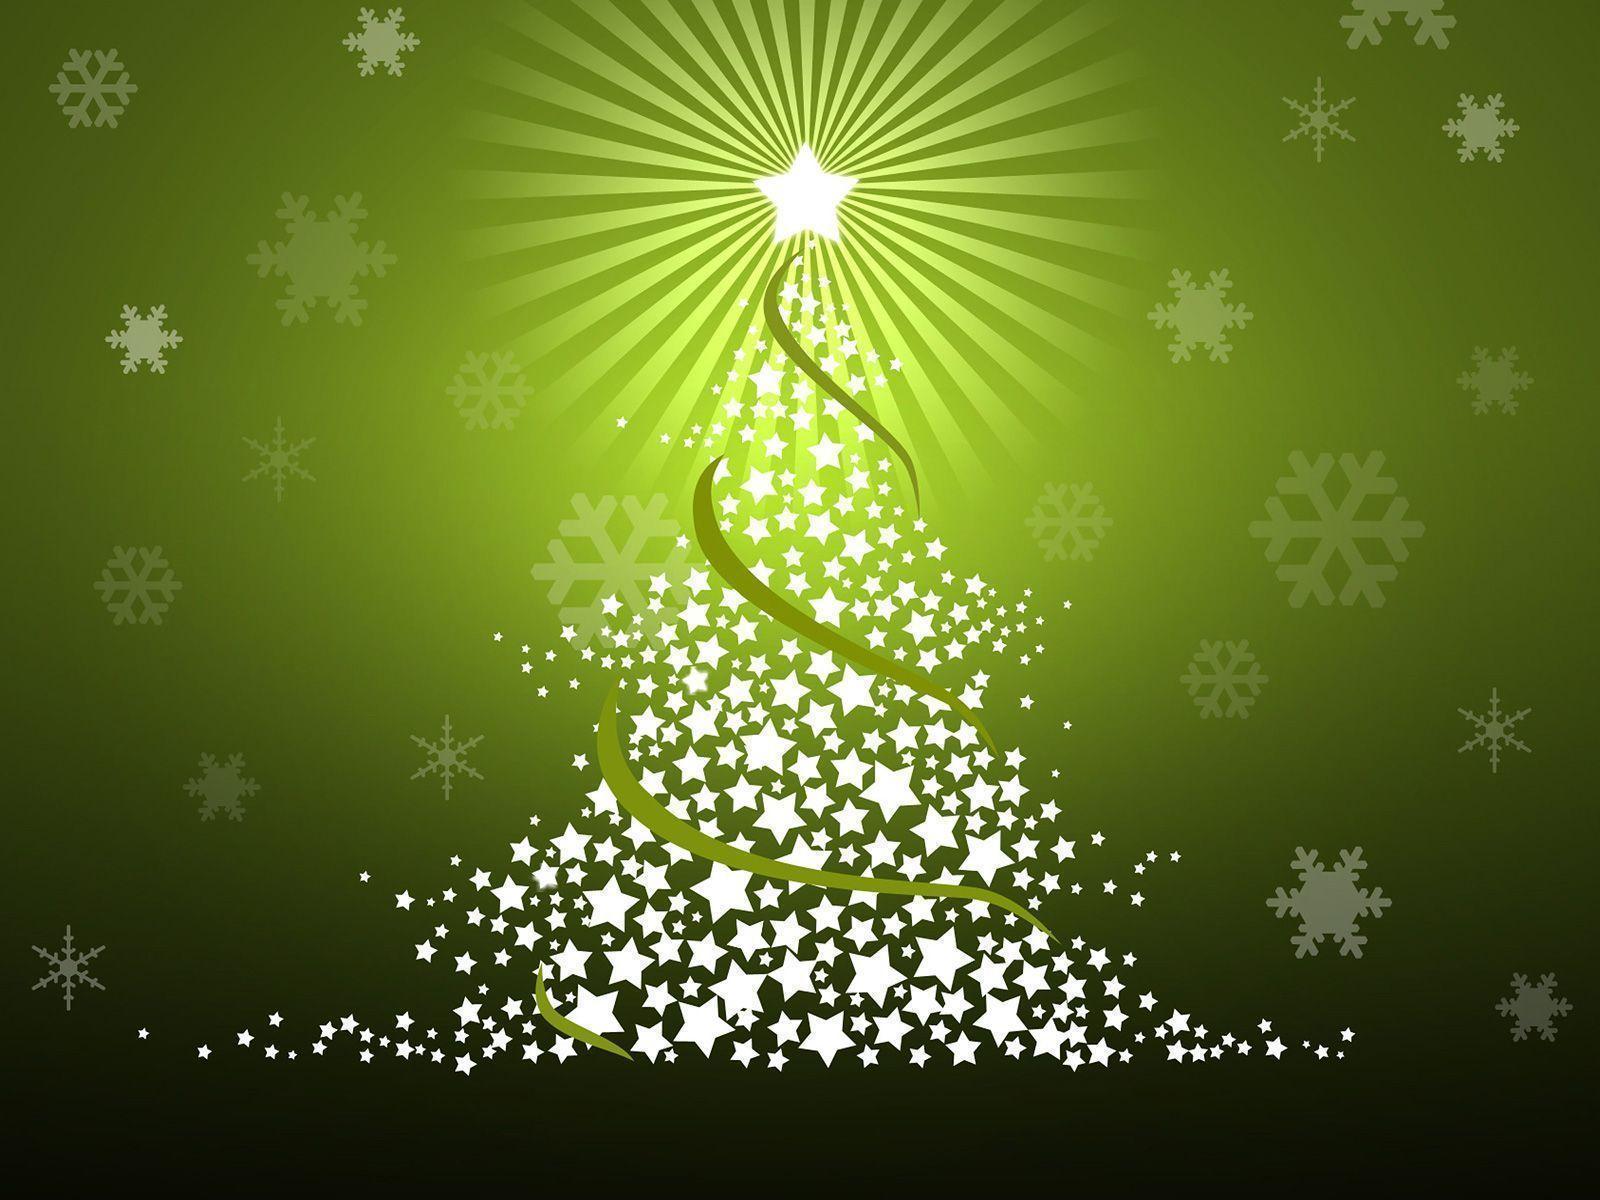 Free Christmas Wallpaper and PowerPoint Background Picture